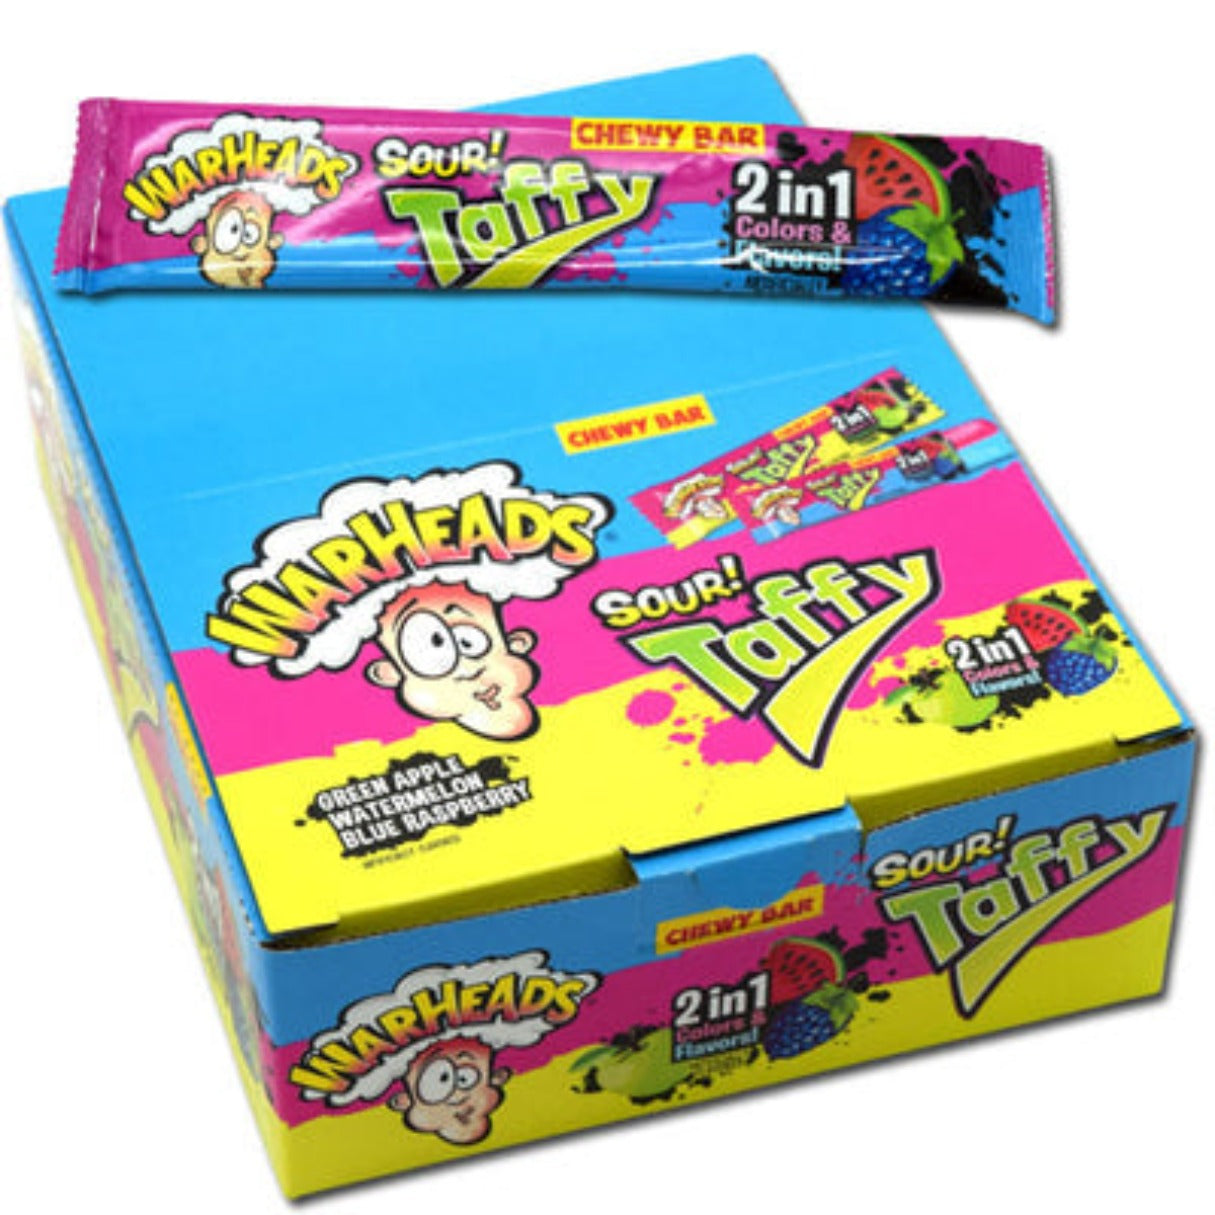 Warheads Sour Taffy 2 in 1 Chewy Bar 1.5oz - 24ct